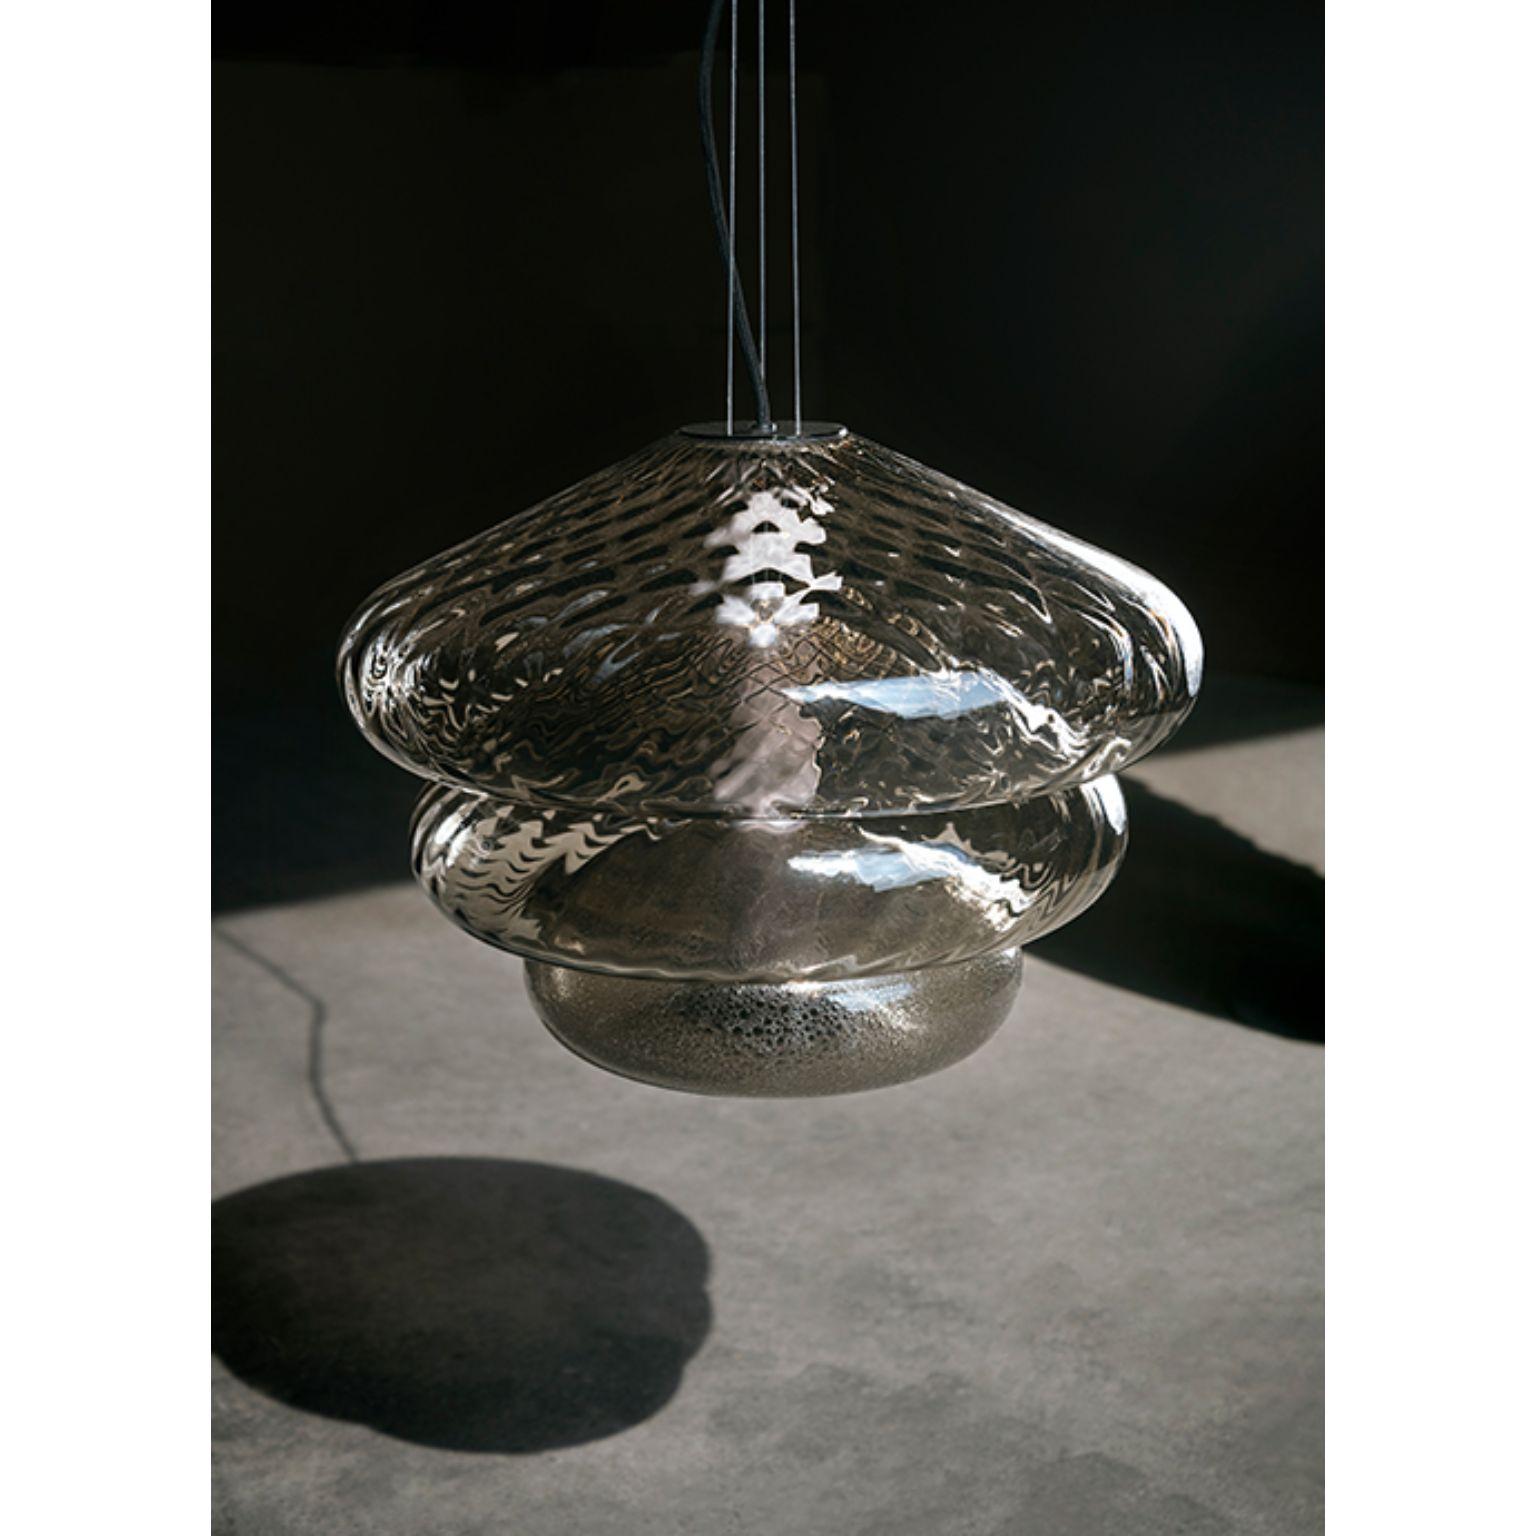 Tima pendant light by Luca Nichetto
Materials: shade: Clear/Grigio Kaiser/Amber mouth blown glass
 Structure: bronze satin, black chrome, glass
Dimensions: W44.2 x D44.2 x H34 cm

 

In the roundness of their sinuous bodies and surprising